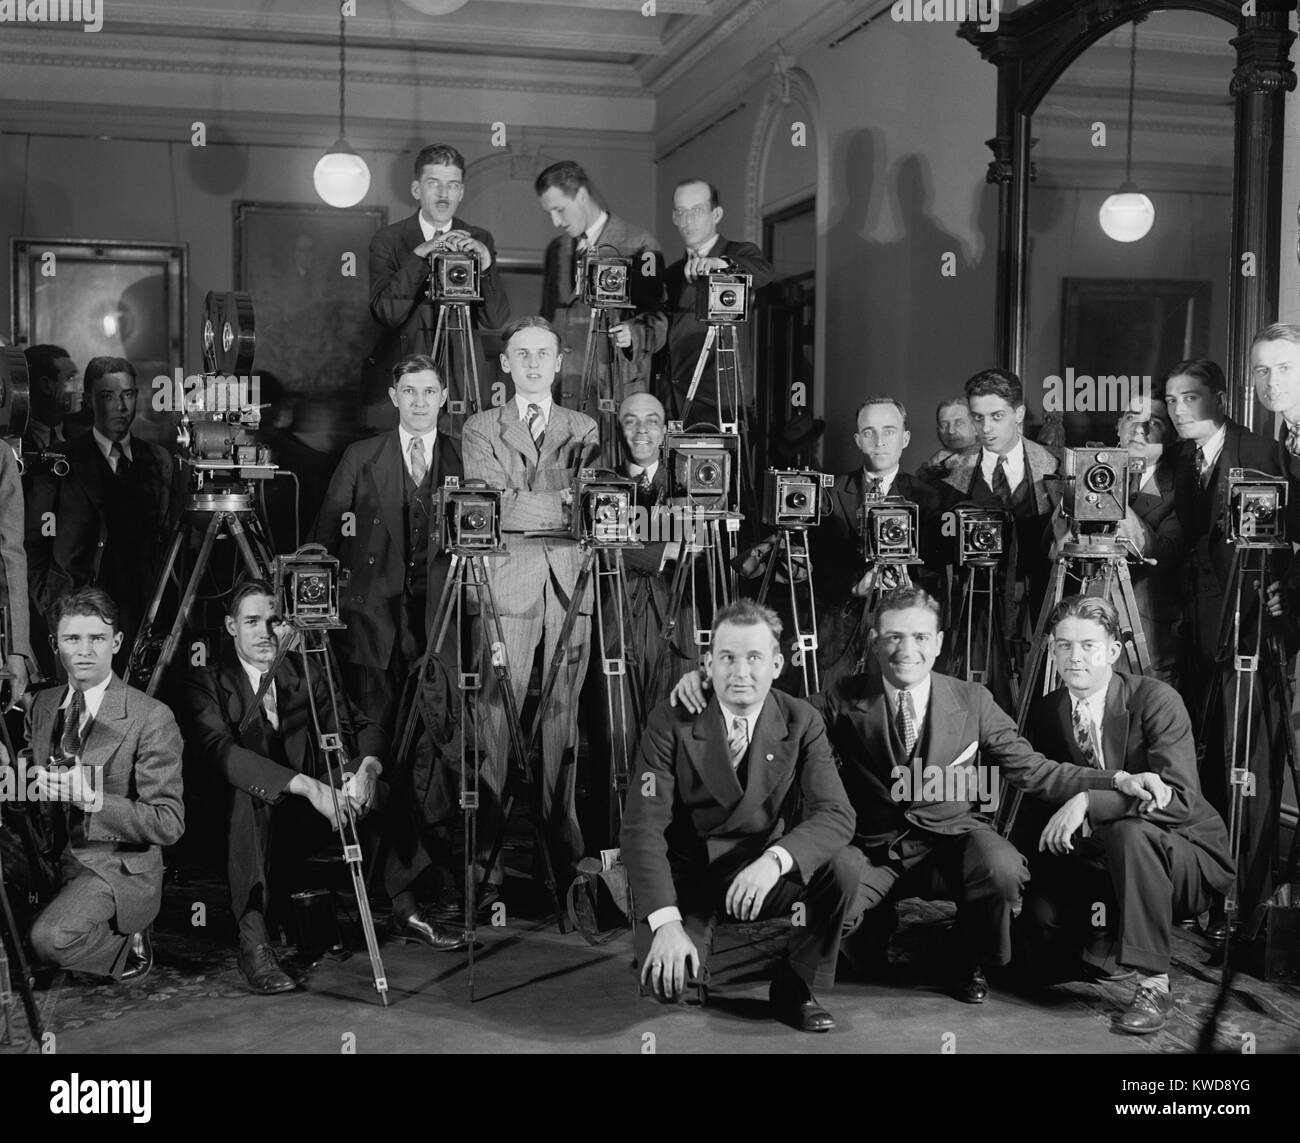 Cameramen of the National Photo Company of Washington, D.C., March 28, 1929. NPC shut down in 1932, when it closed after falling victim to the Great Depression (BSLOC 2016 8 155) Stock Photo